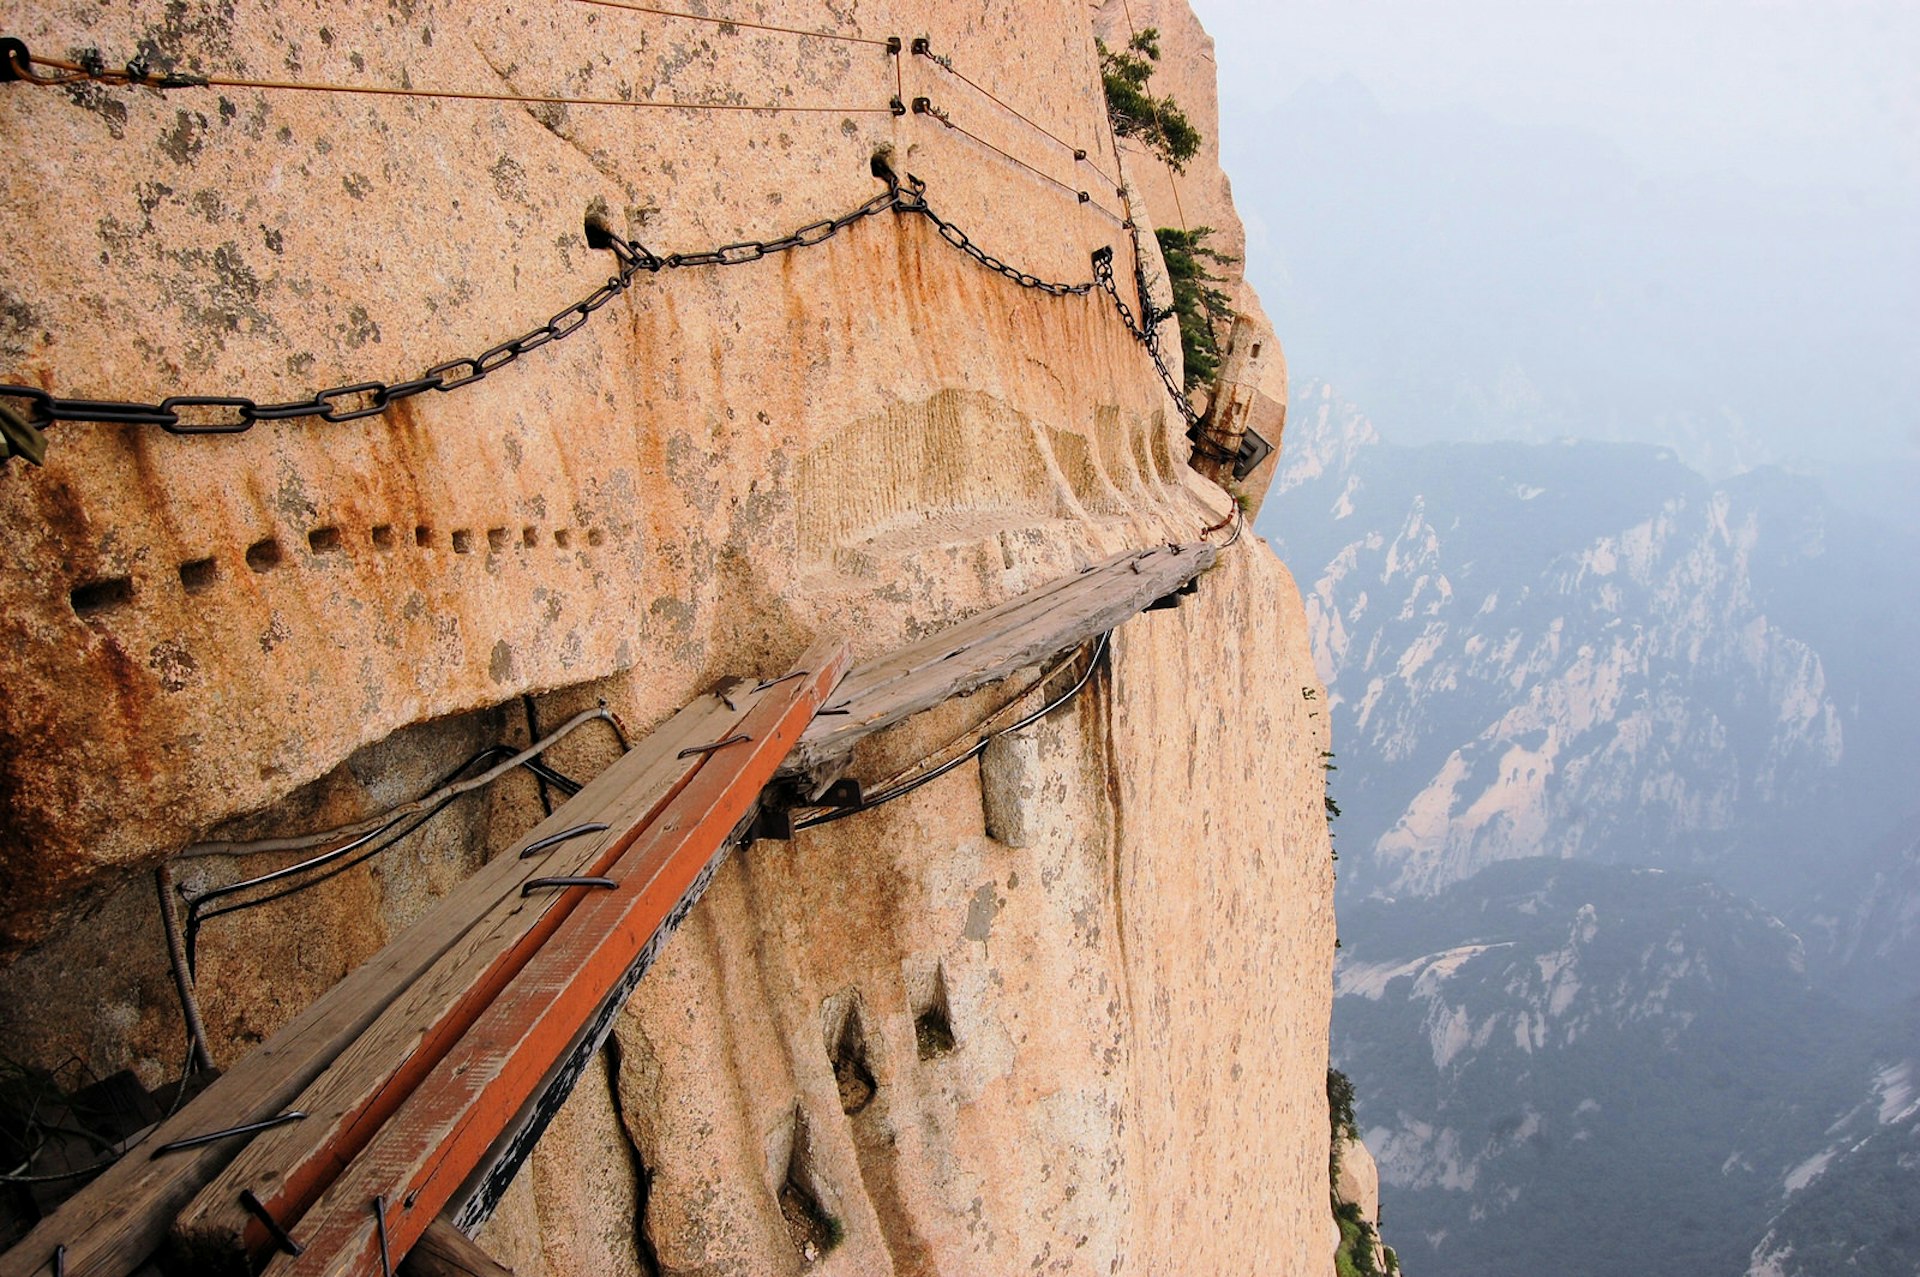 Hike if you dare: rickety plank walkways along Hua Shan's sheer cliff faces © flocu / Getty